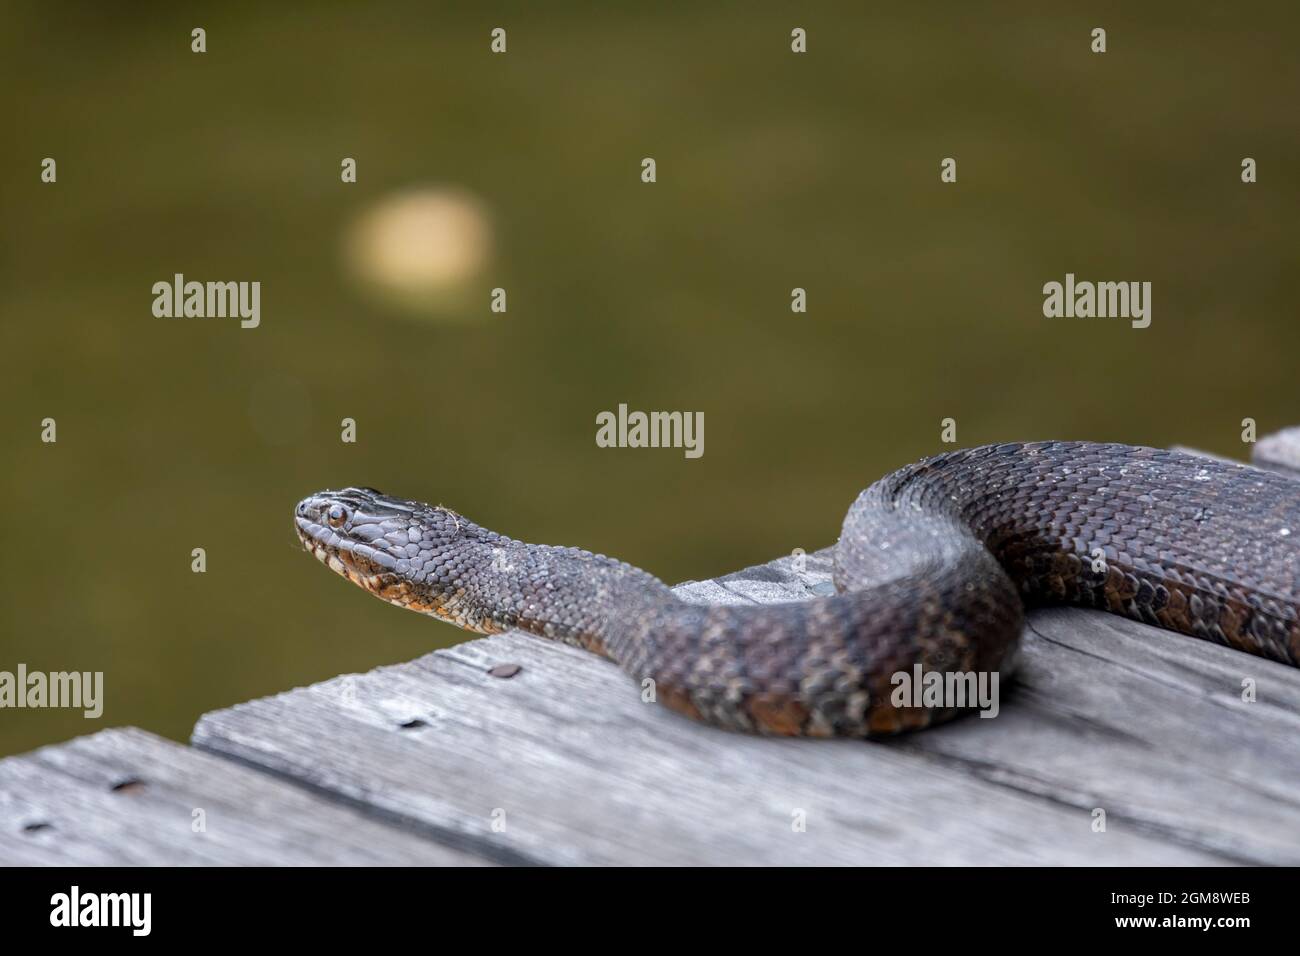 Prairieville, Michigan - A Northern Water Snake (Nerodia sipedon) on a wooden dock on a small west Michigan lake. Stock Photo